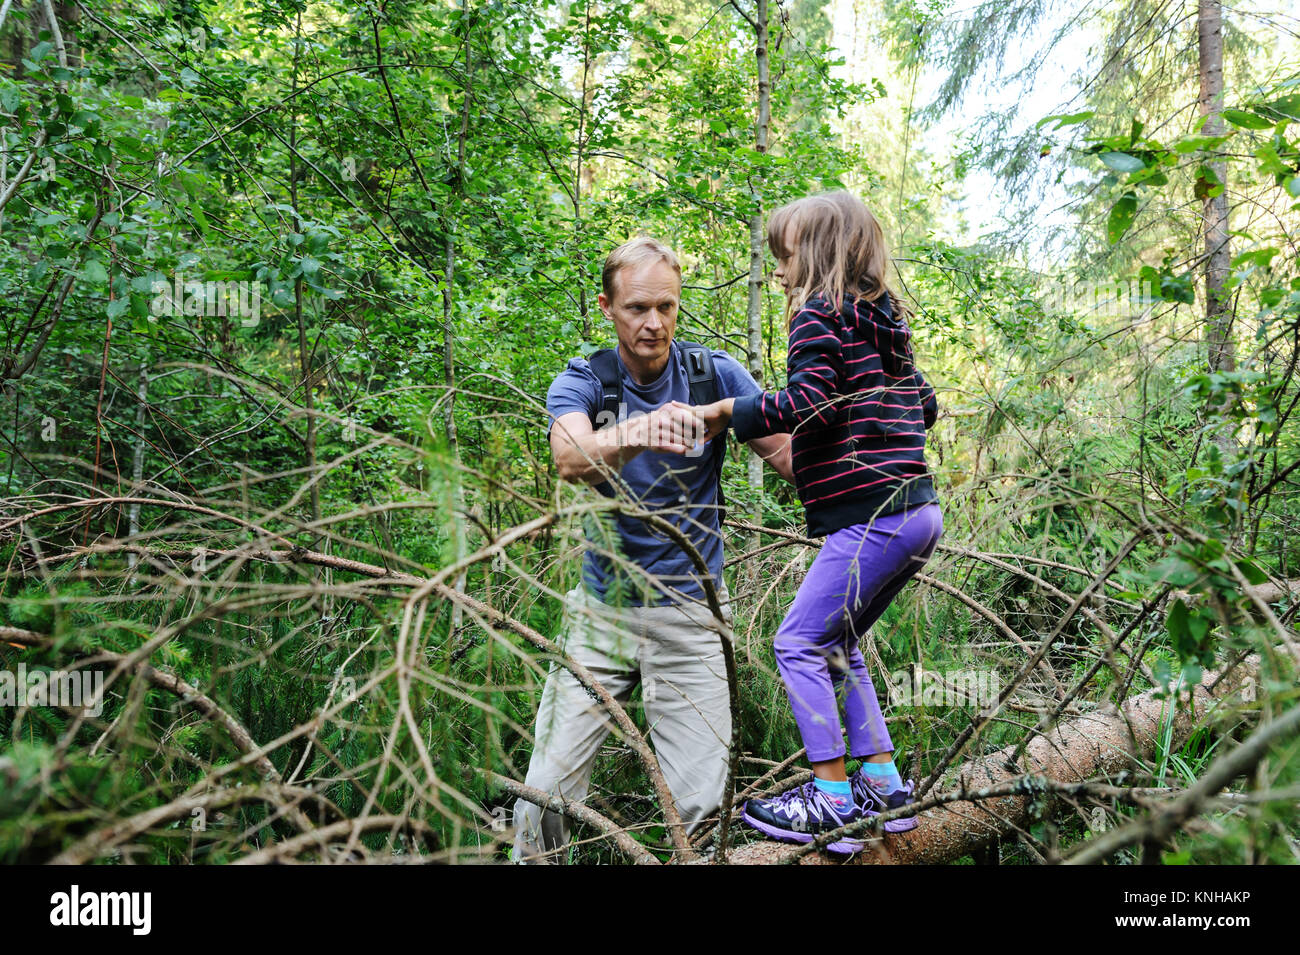 Overcoming obstacles while walking in the forest. The adult is helping the girl to cross the fallen tree. Stock Photo